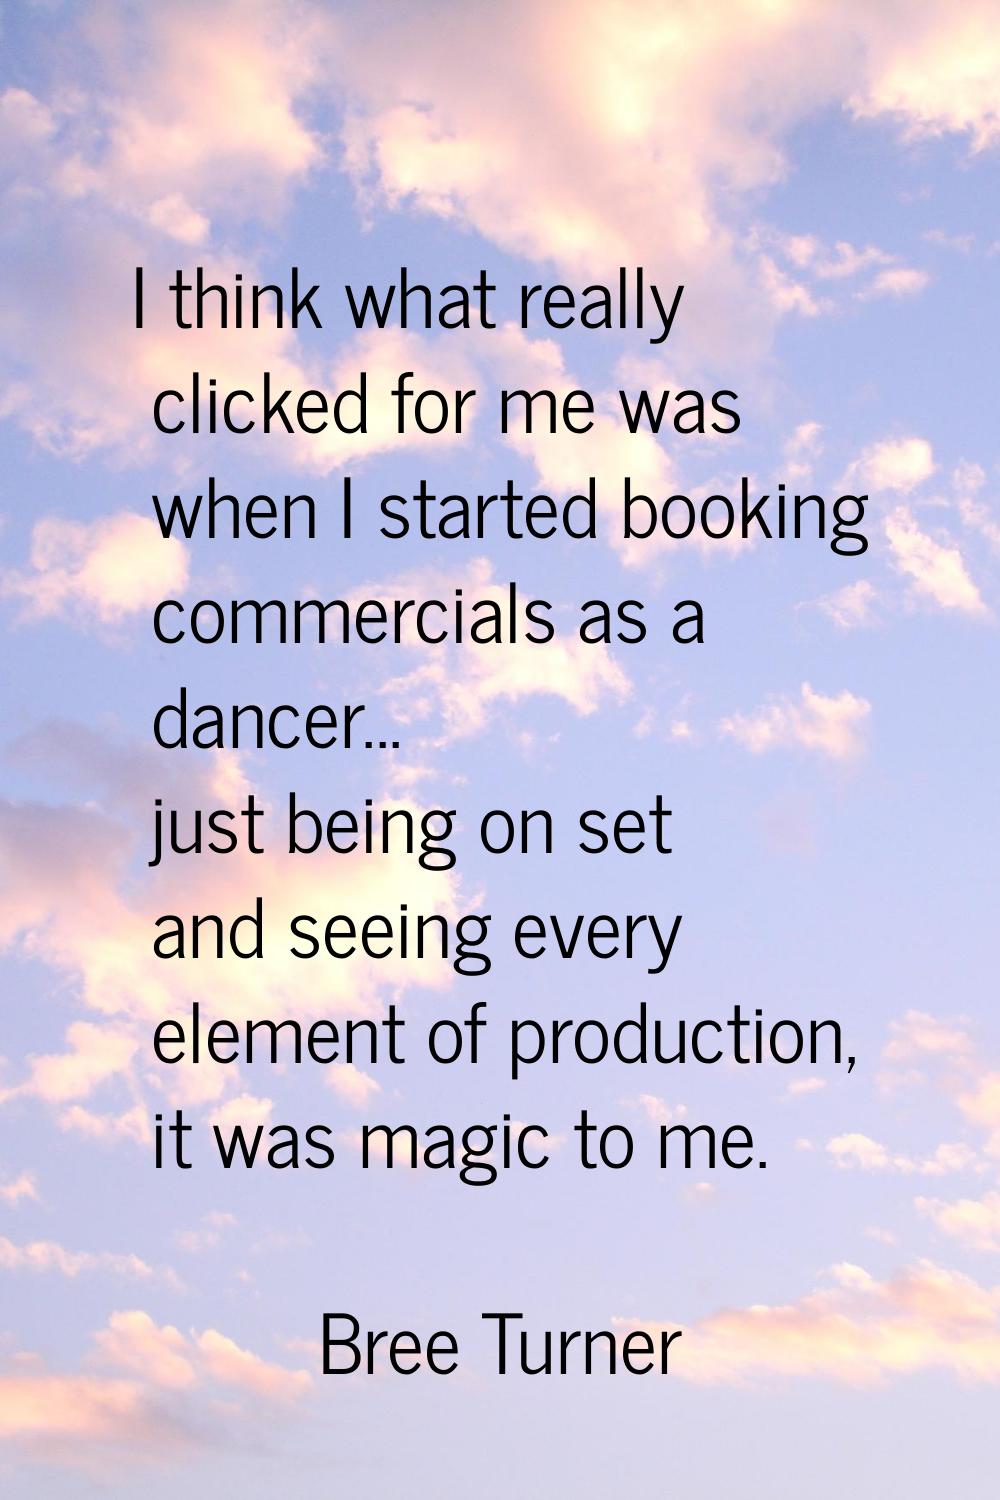 I think what really clicked for me was when I started booking commercials as a dancer... just being